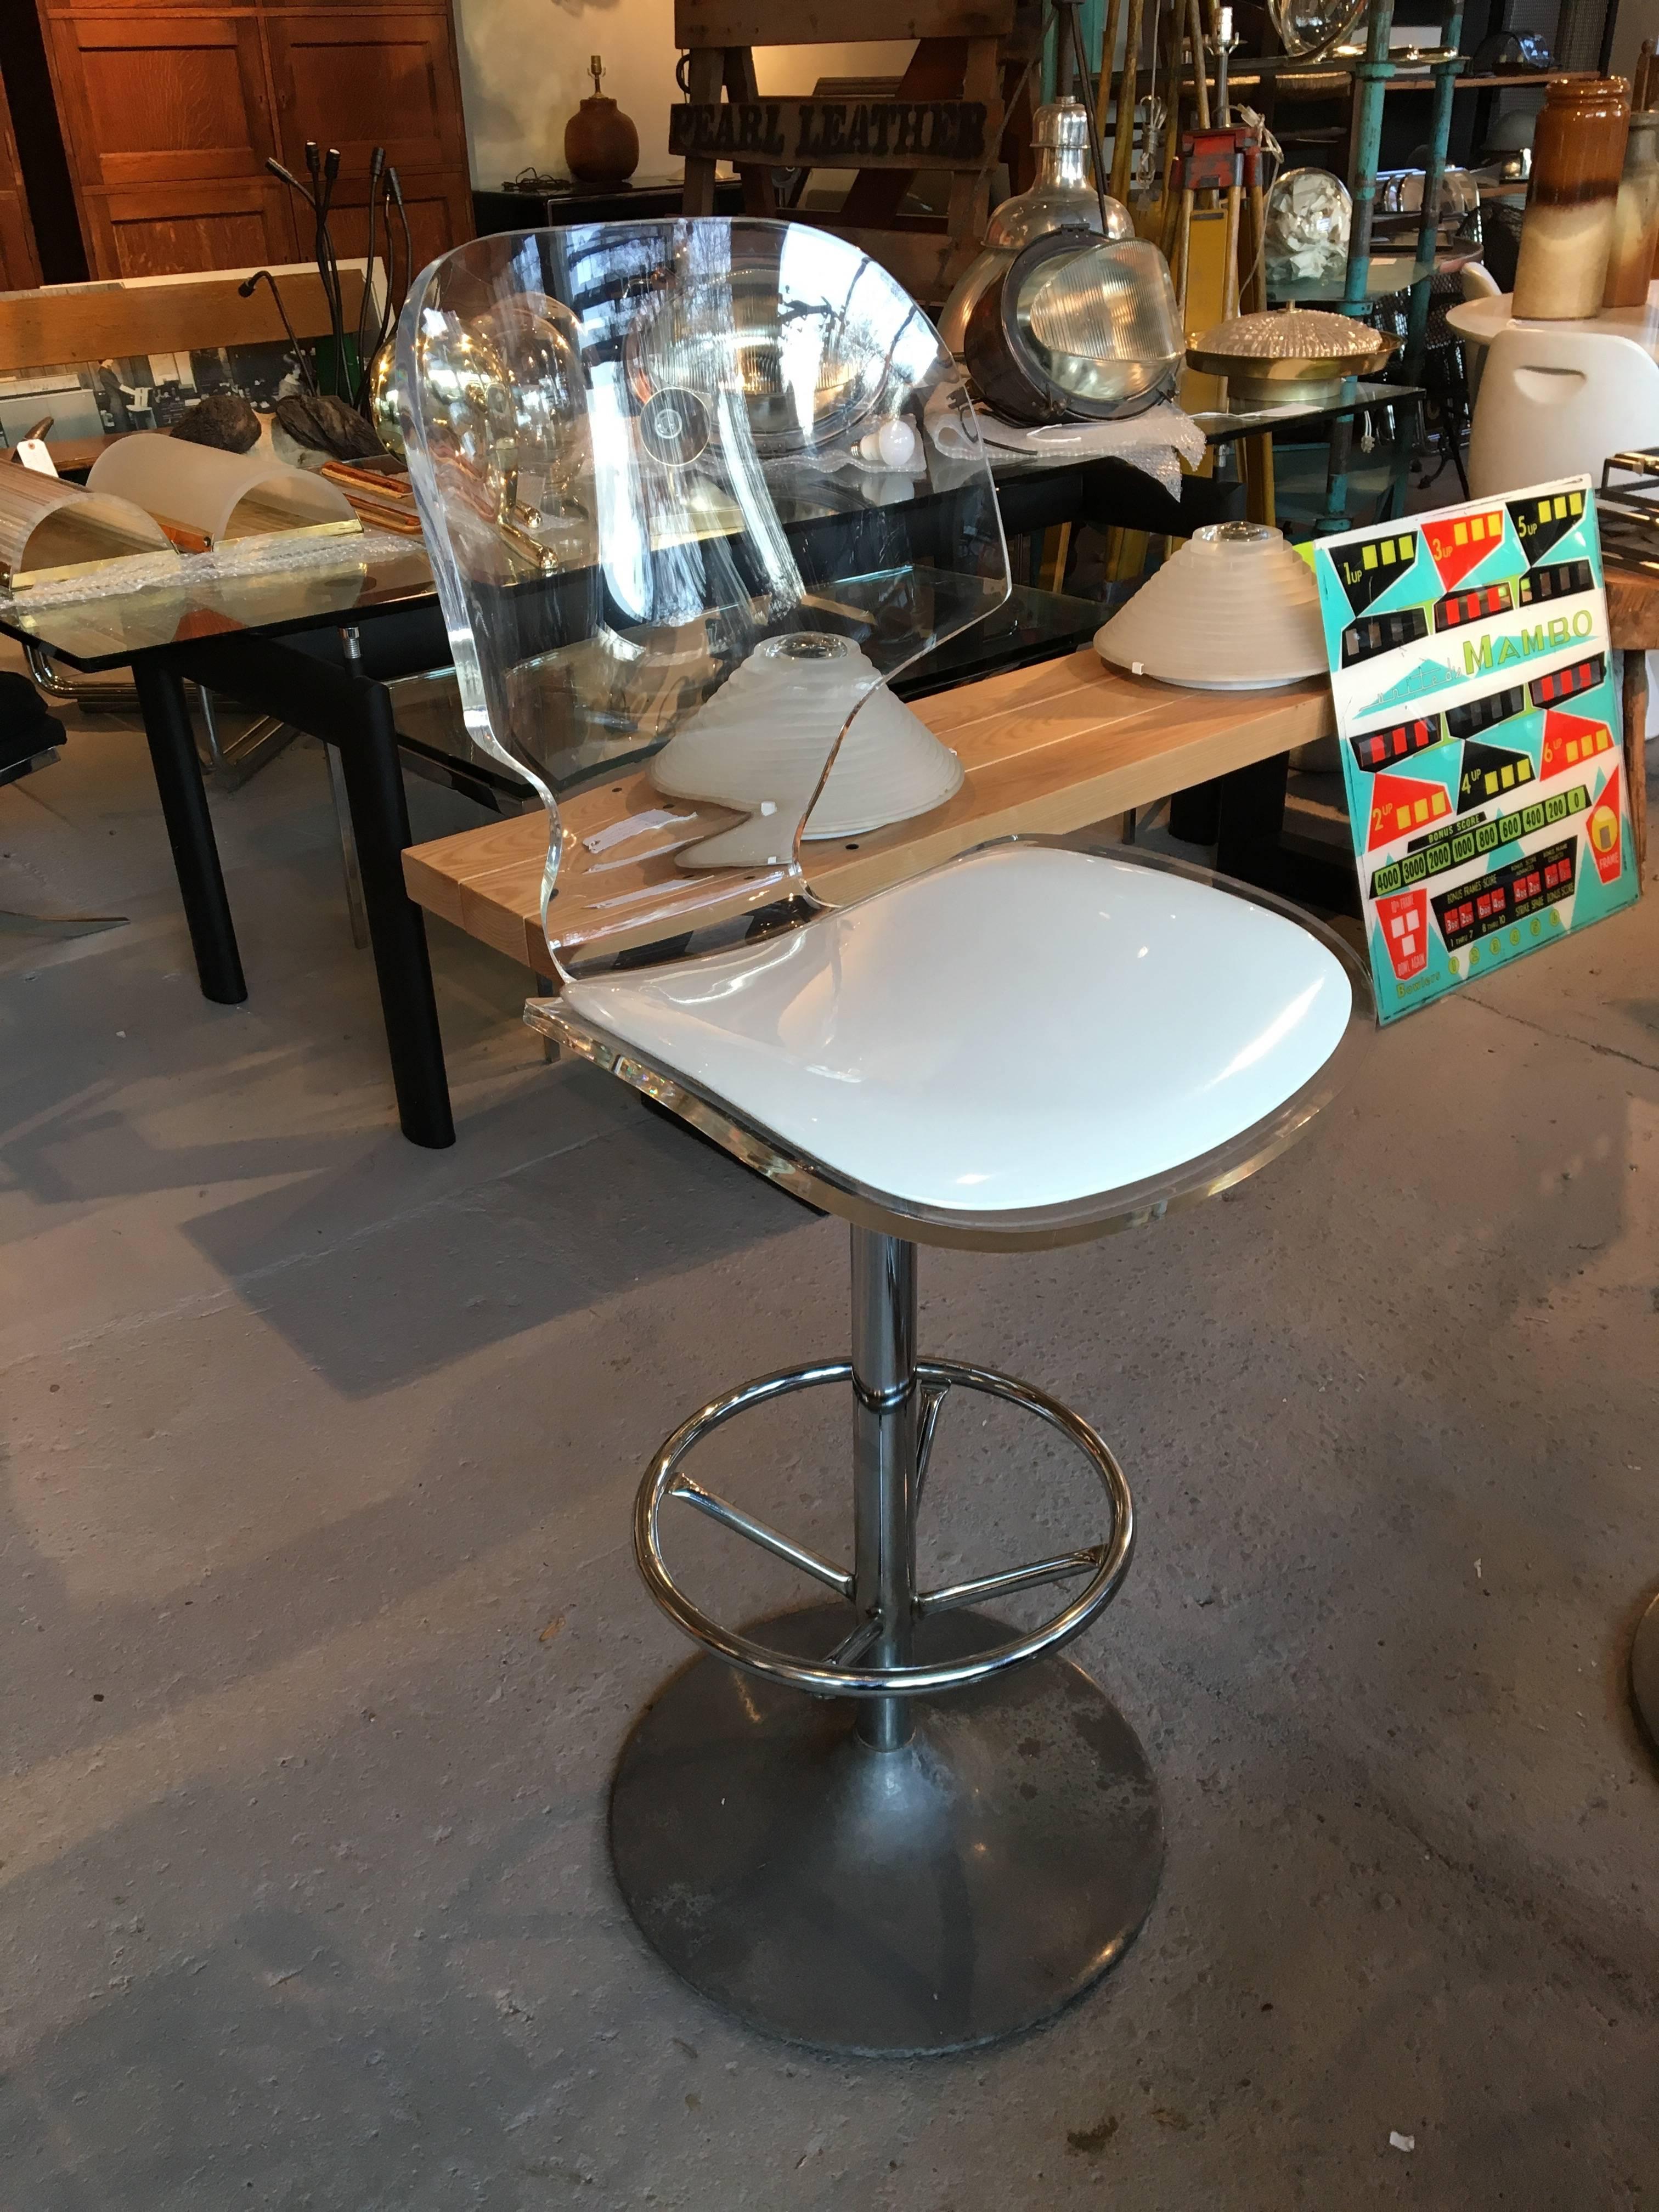 set of 3 Lucite swivel barstools by Hill Manufacturing Corp, with clamshell shape seat, white patent leatherette seats, chrome footrests, and aluminum tulip style bases that have great natural patina but can be polished if desired.